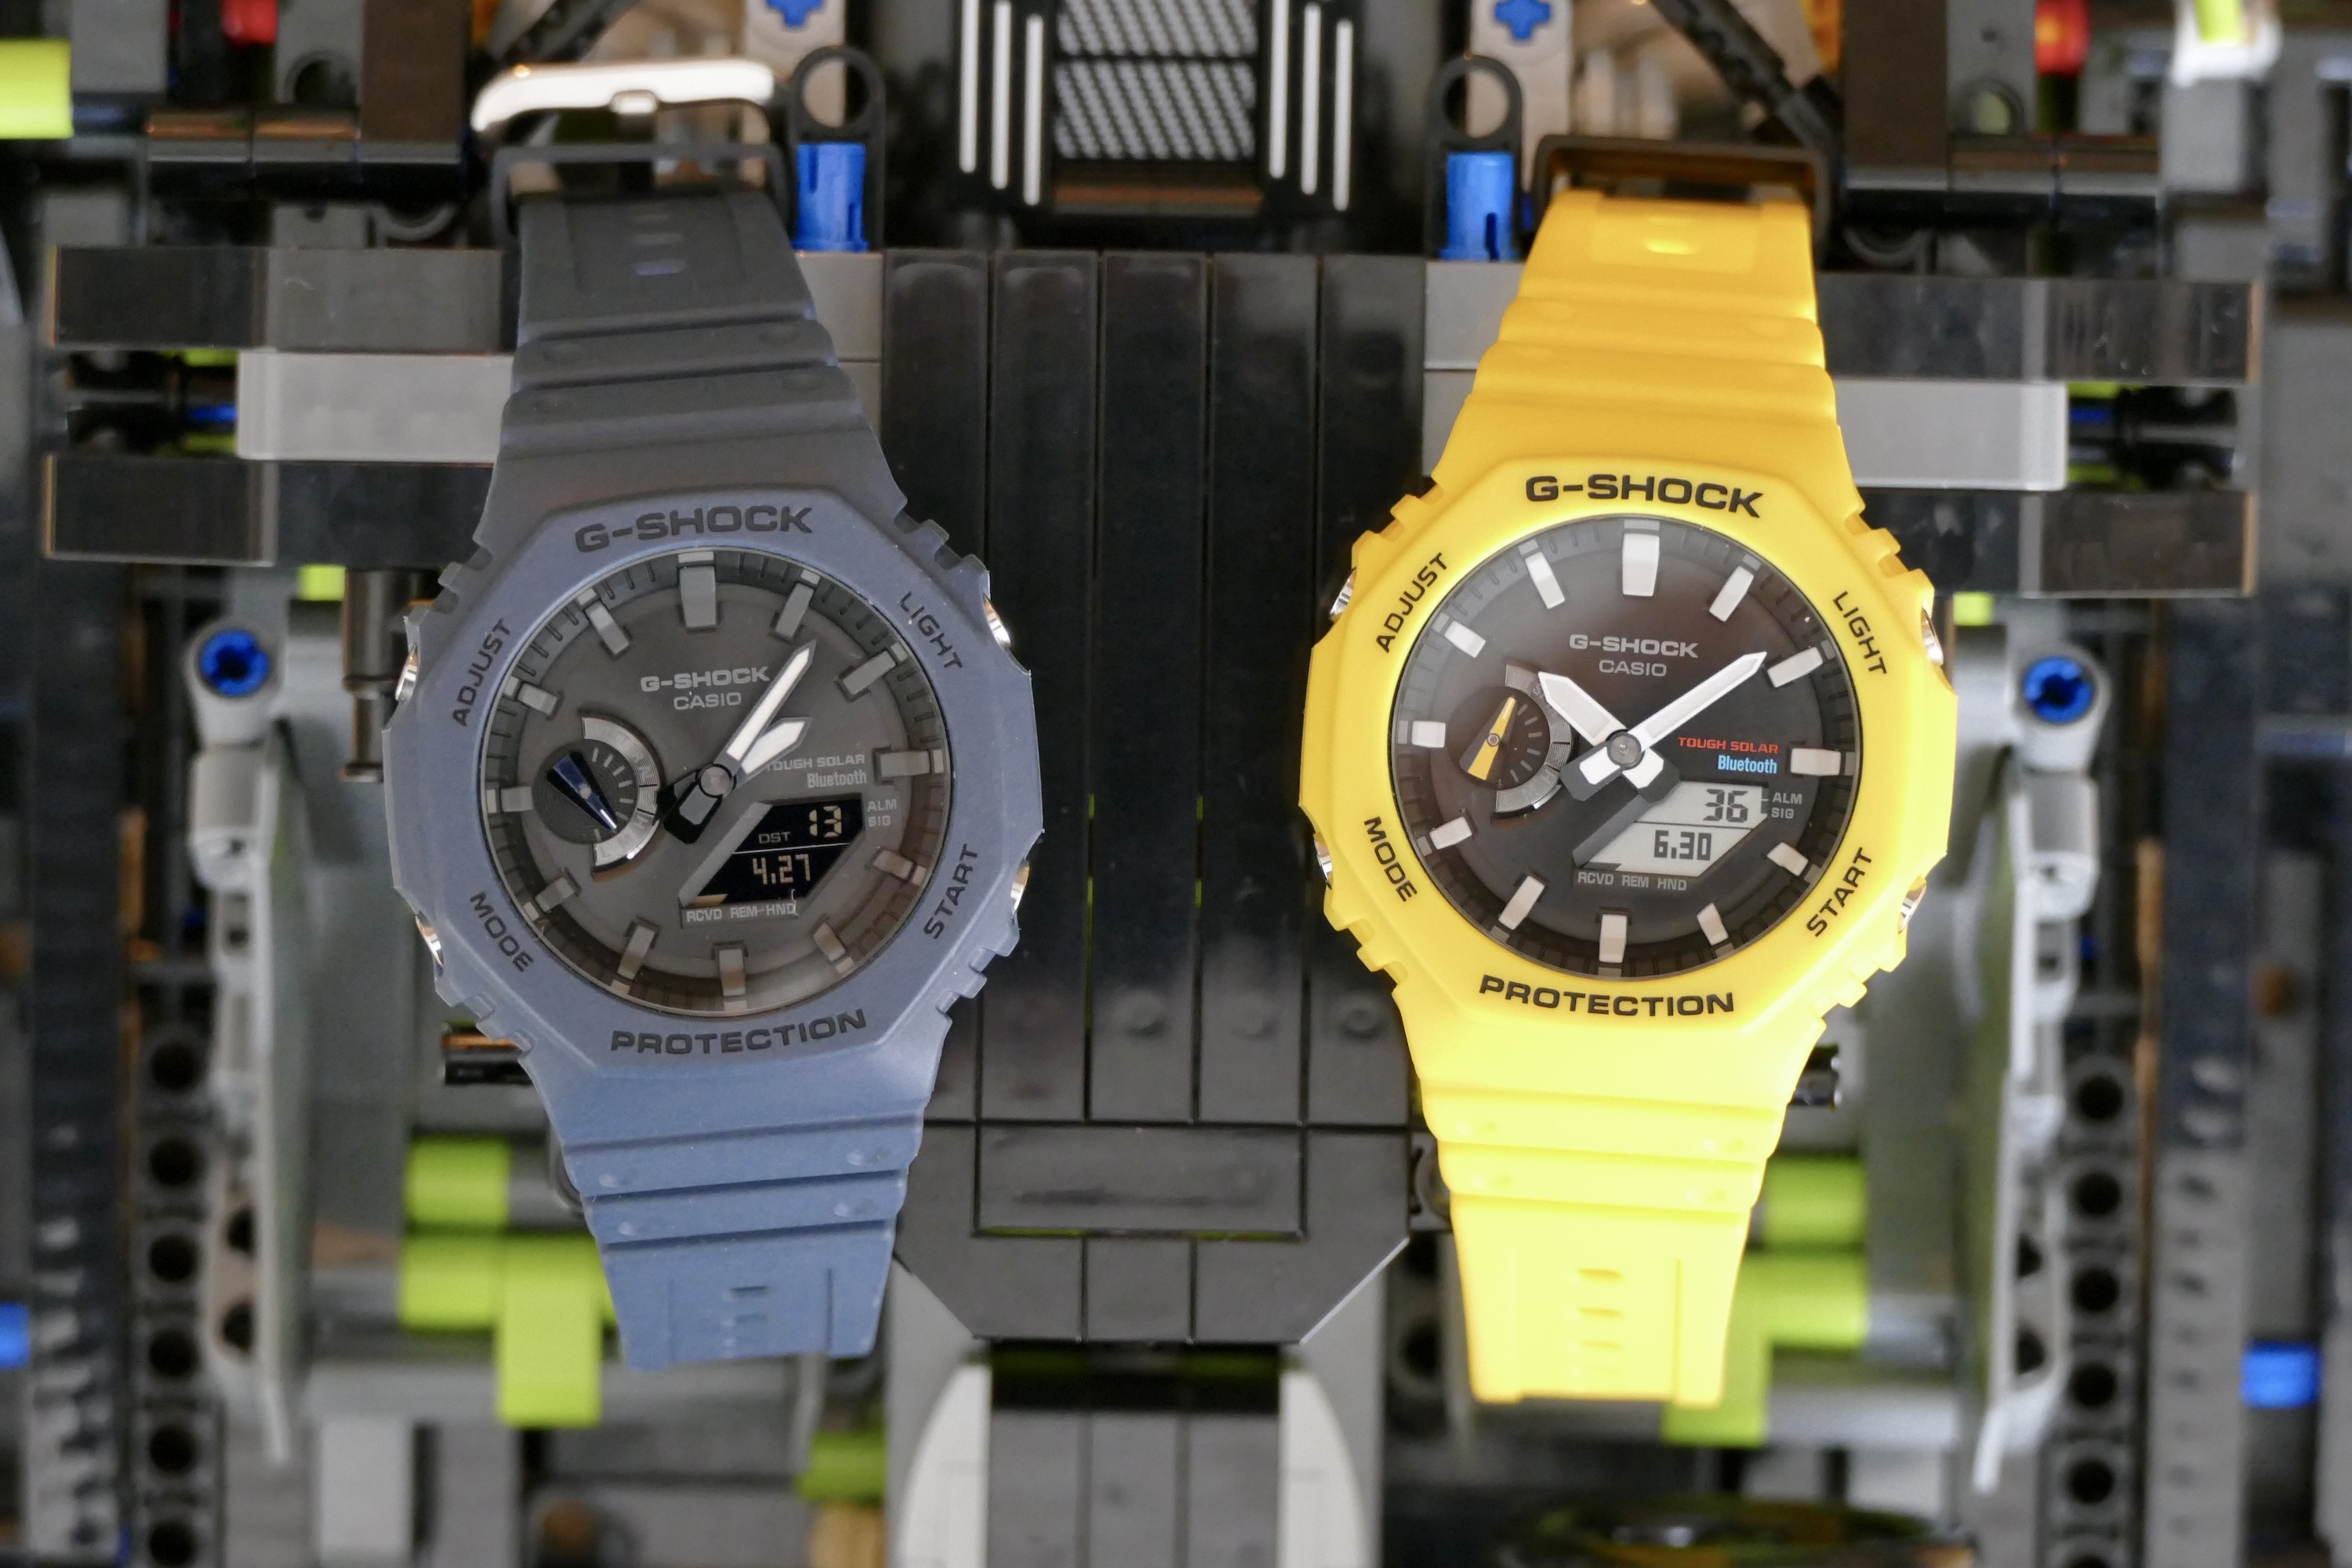 The tech-boosted watch great GA-B2100 | buy a Trends Digital is G-Shock